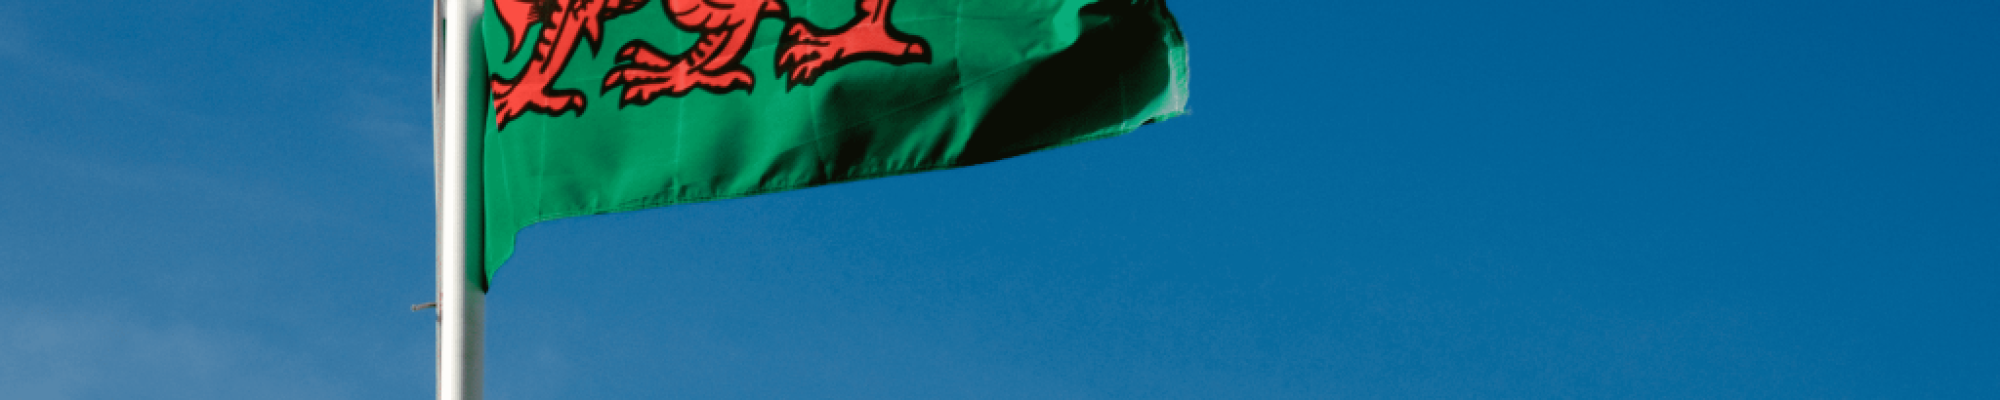 The welsh flag